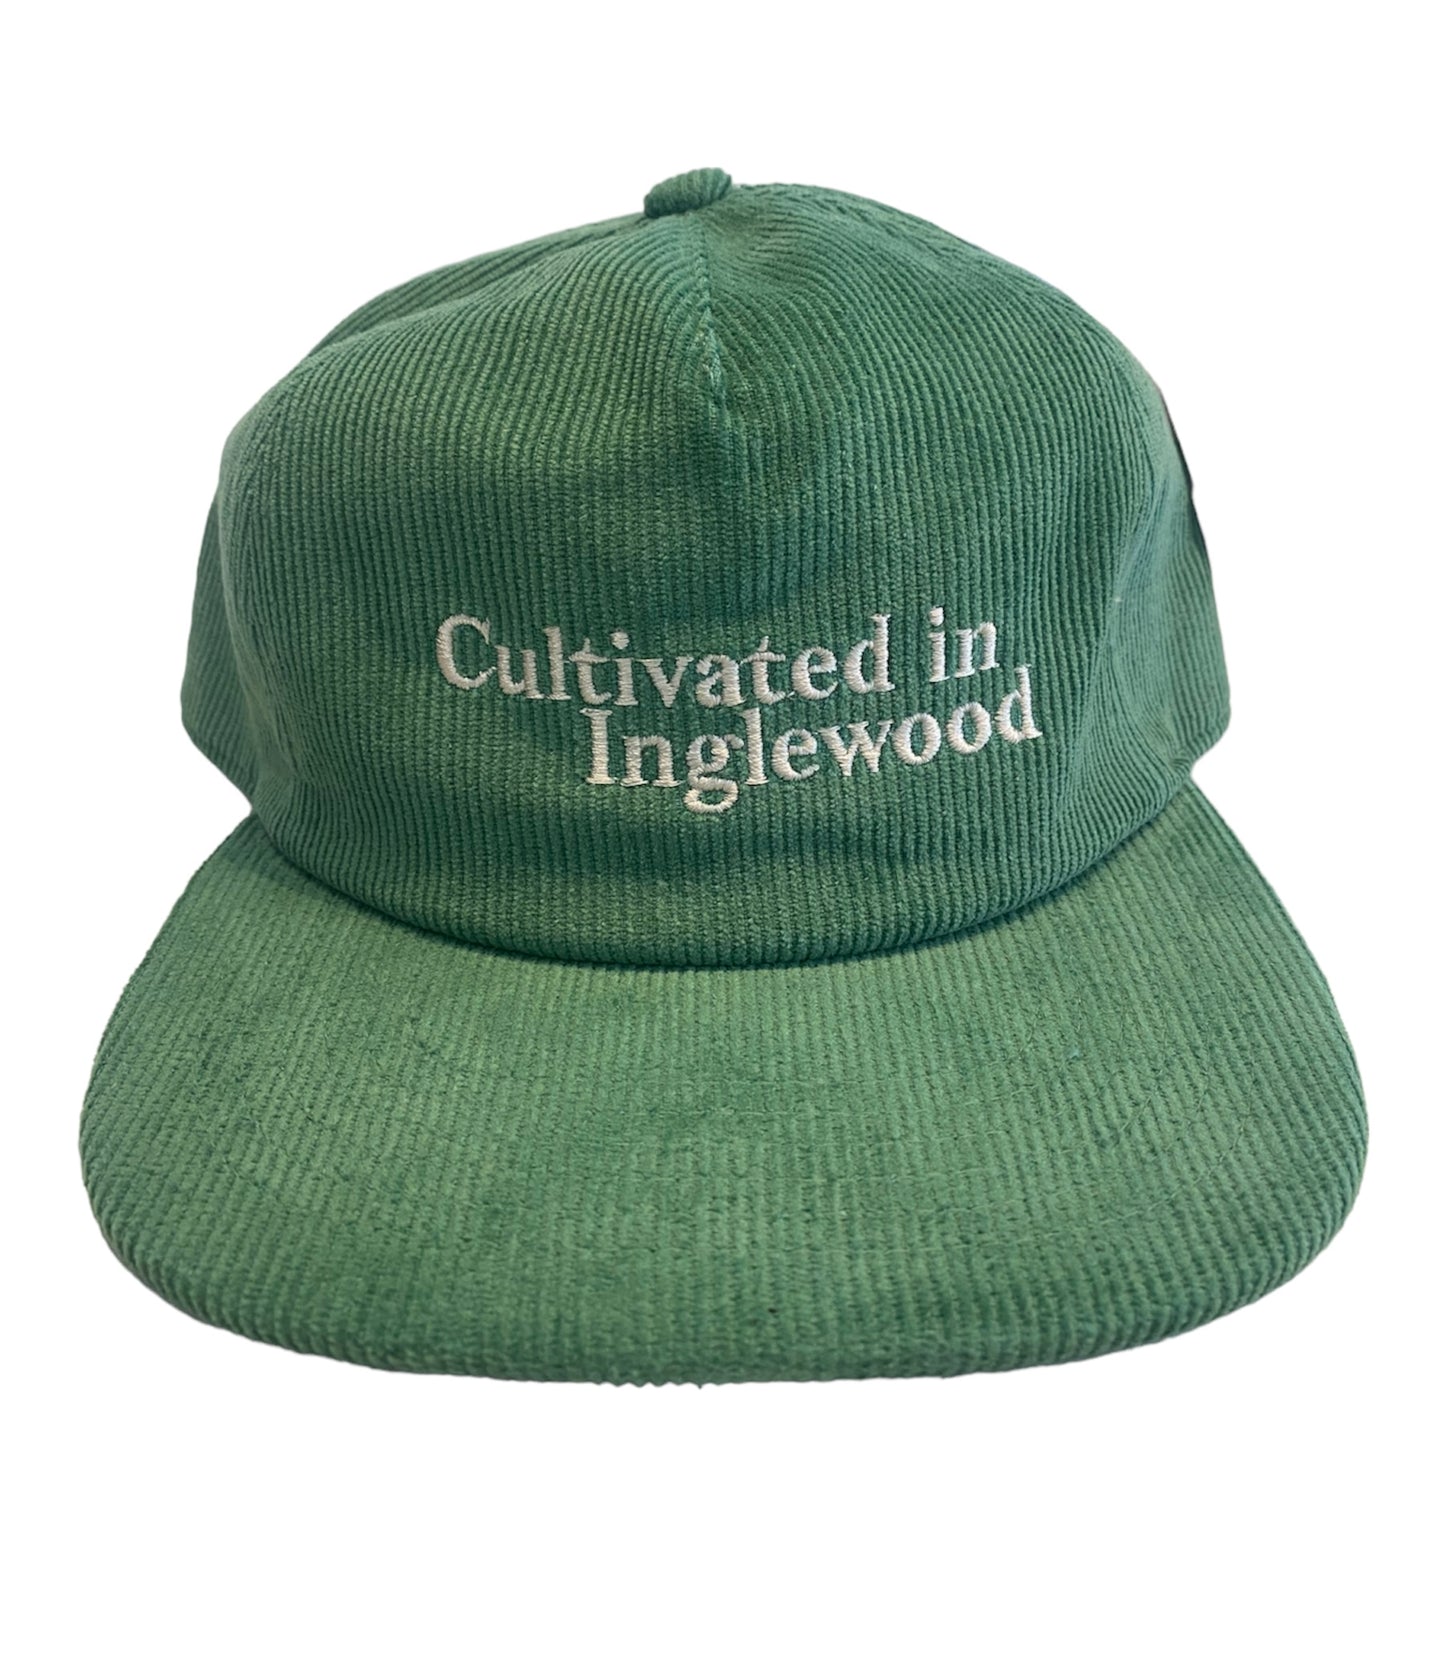 Cultivated in Inglewood Cord Cap - kelly